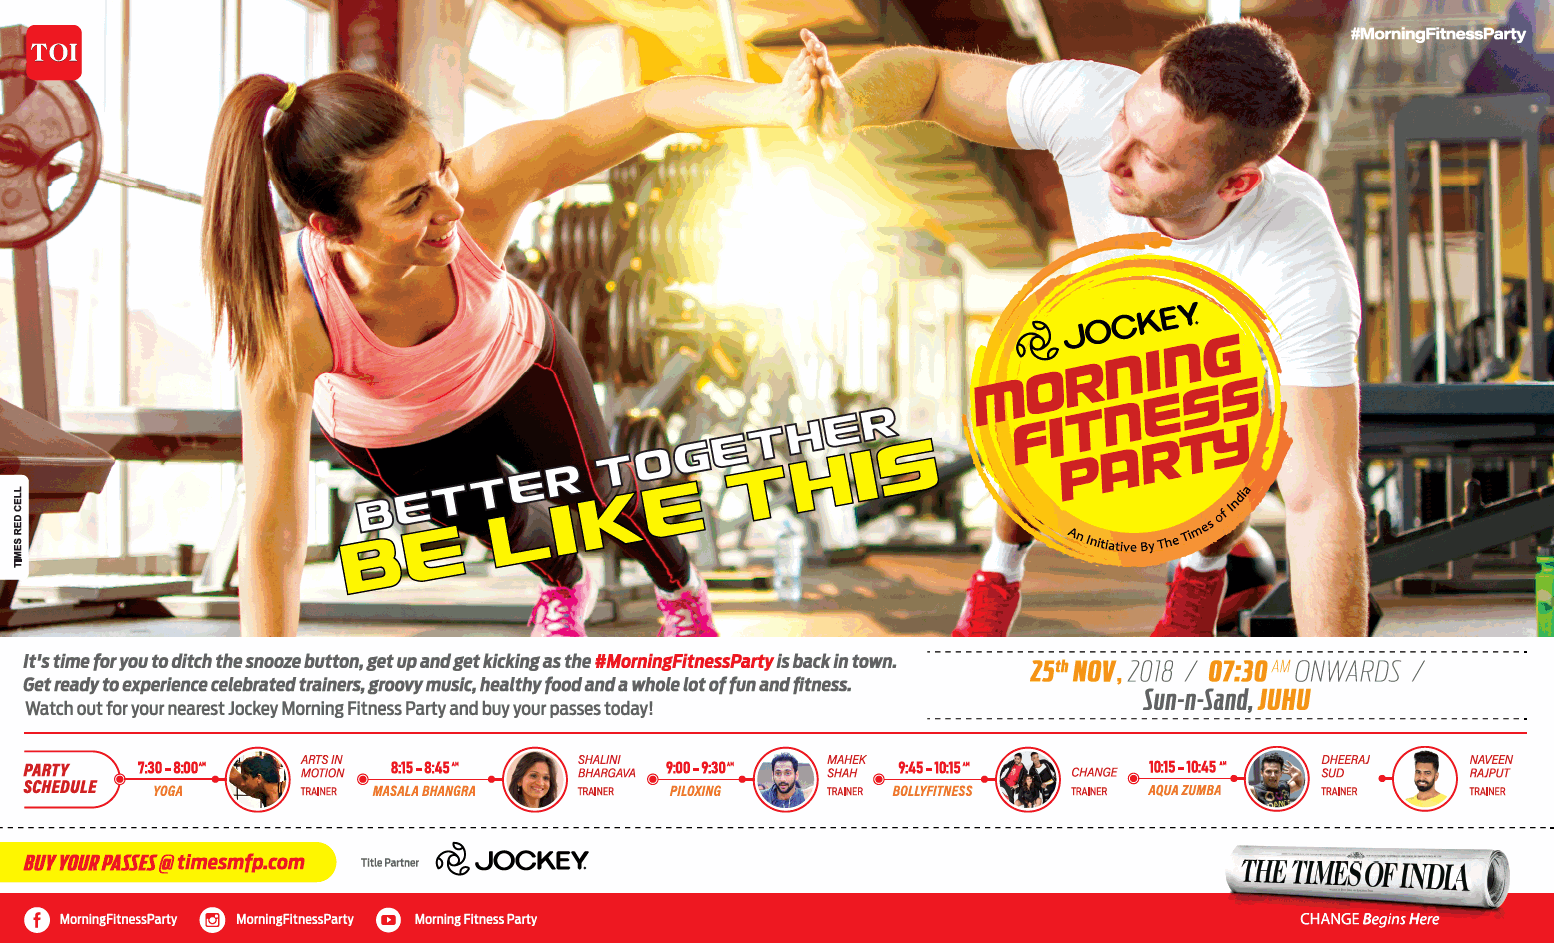 jockey-morning-fitness-party-better-together-be-like-this-ad-times-of-india-mumbai-23-11-2018.png